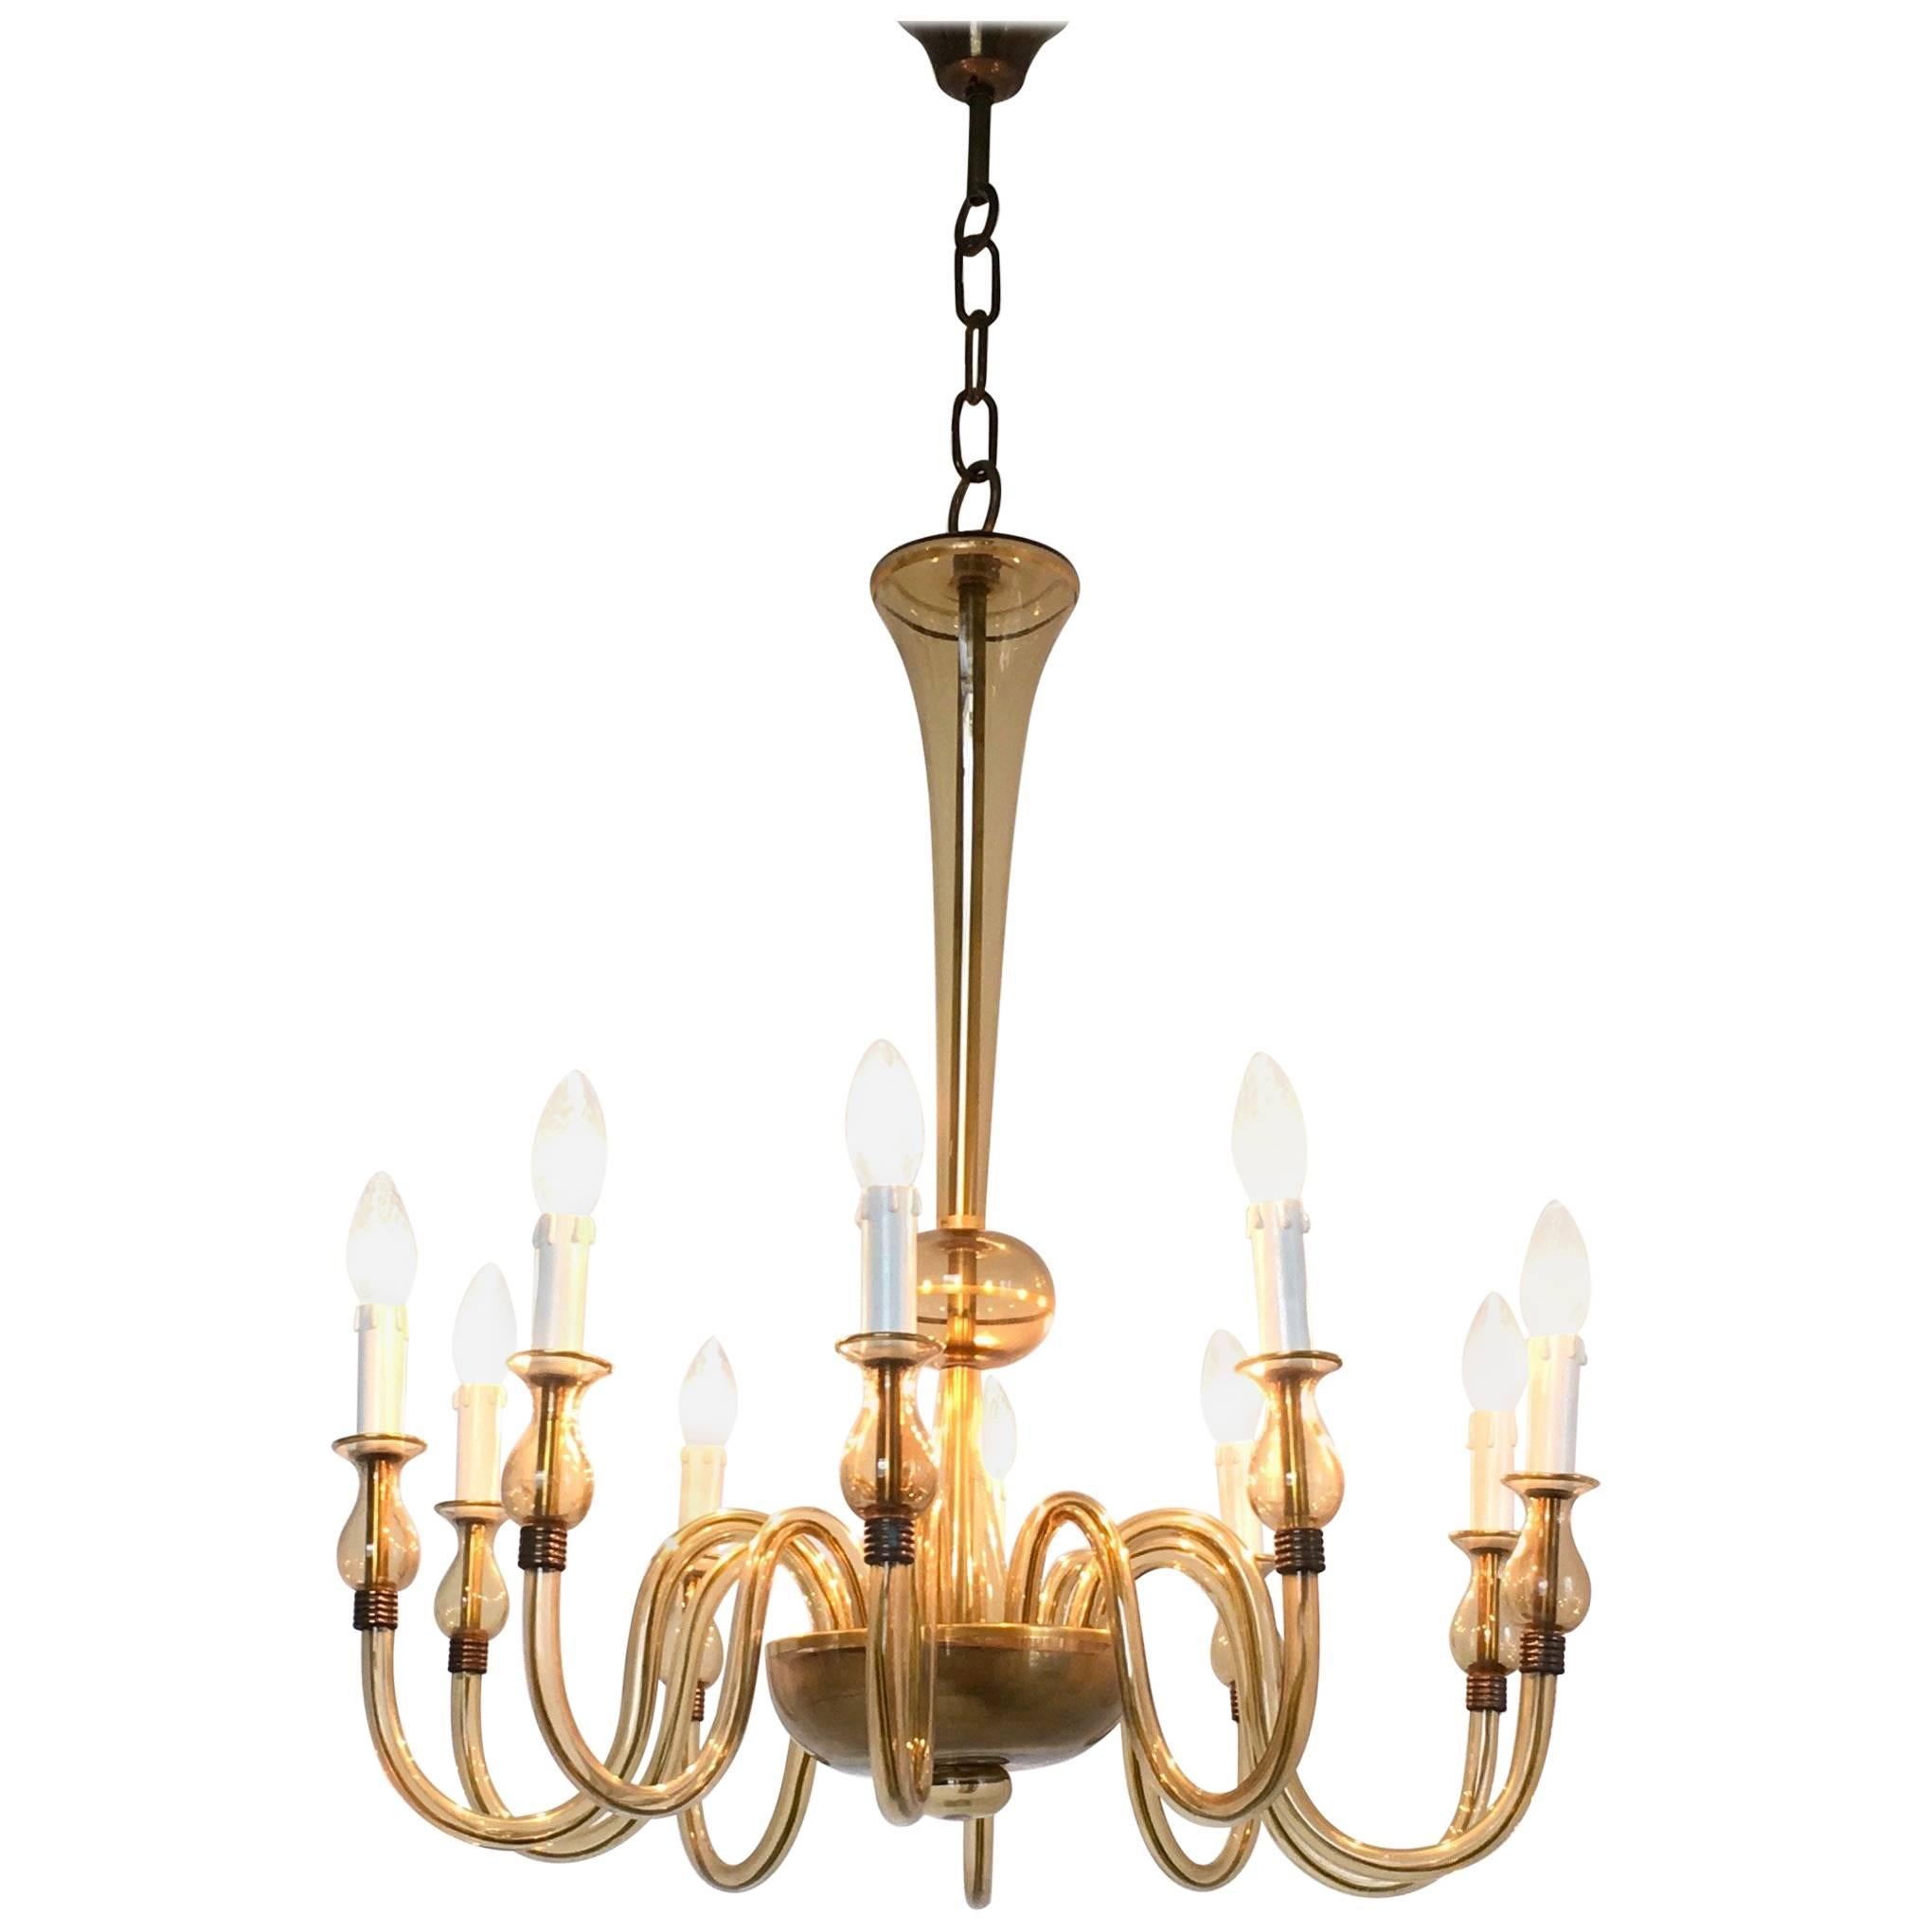 This chandelier is made in Murano glass and was produced in Italy in the 1940s.
It is a vintage piece therefore it might show slight trace of use, but it can be considered as in excellent original condition and ready to give ambiance to any